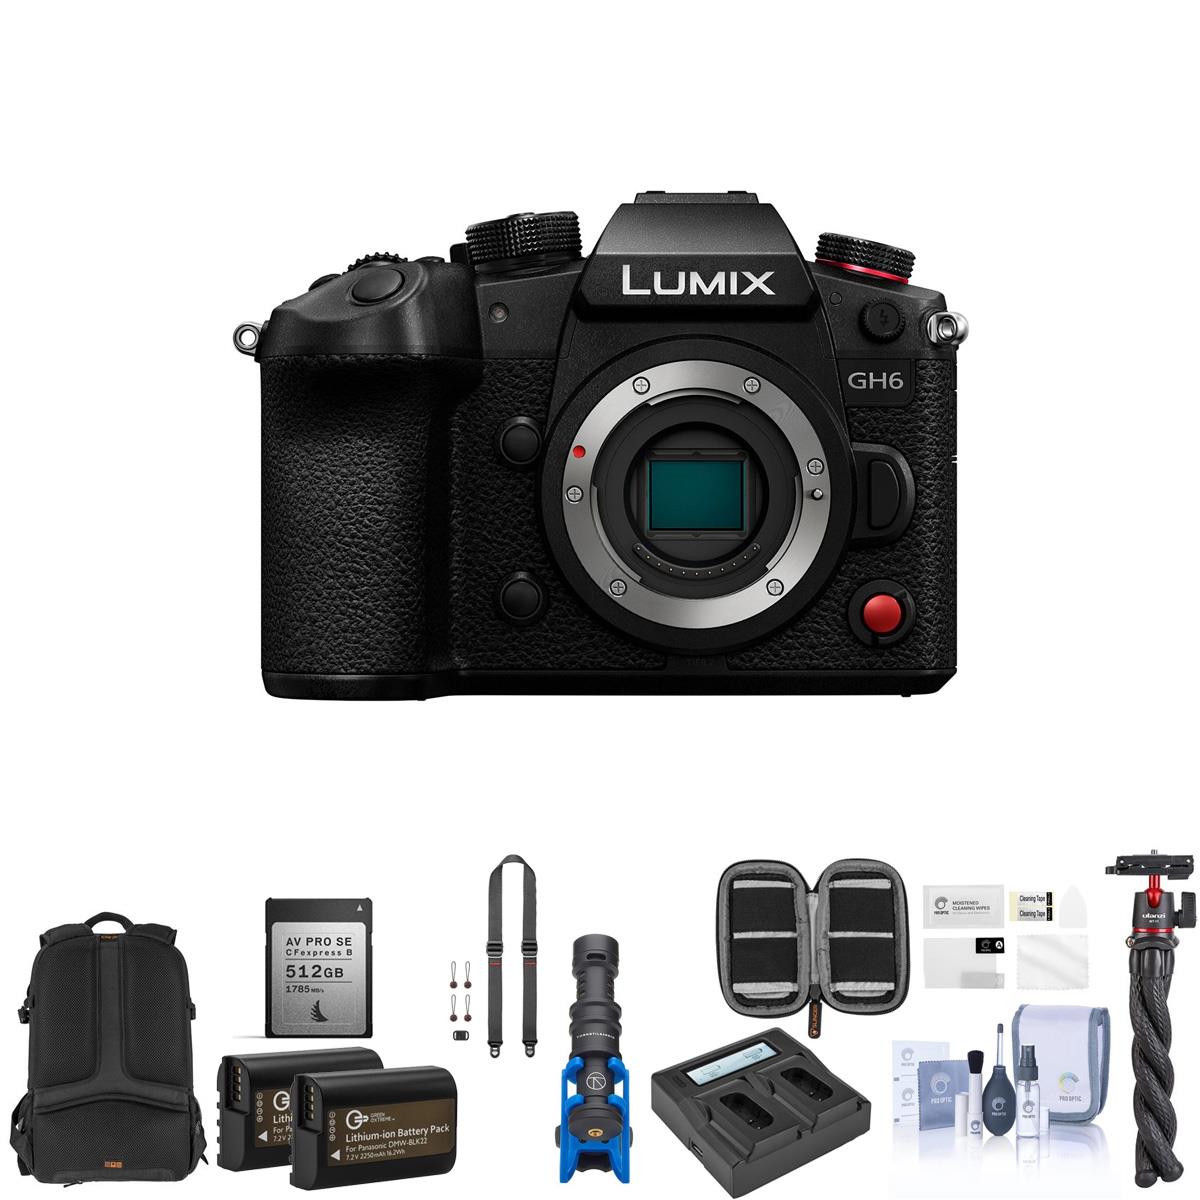 Image of Panasonic Lumix GH6 Mirrorless Camera Body with Complete Accessories Kit